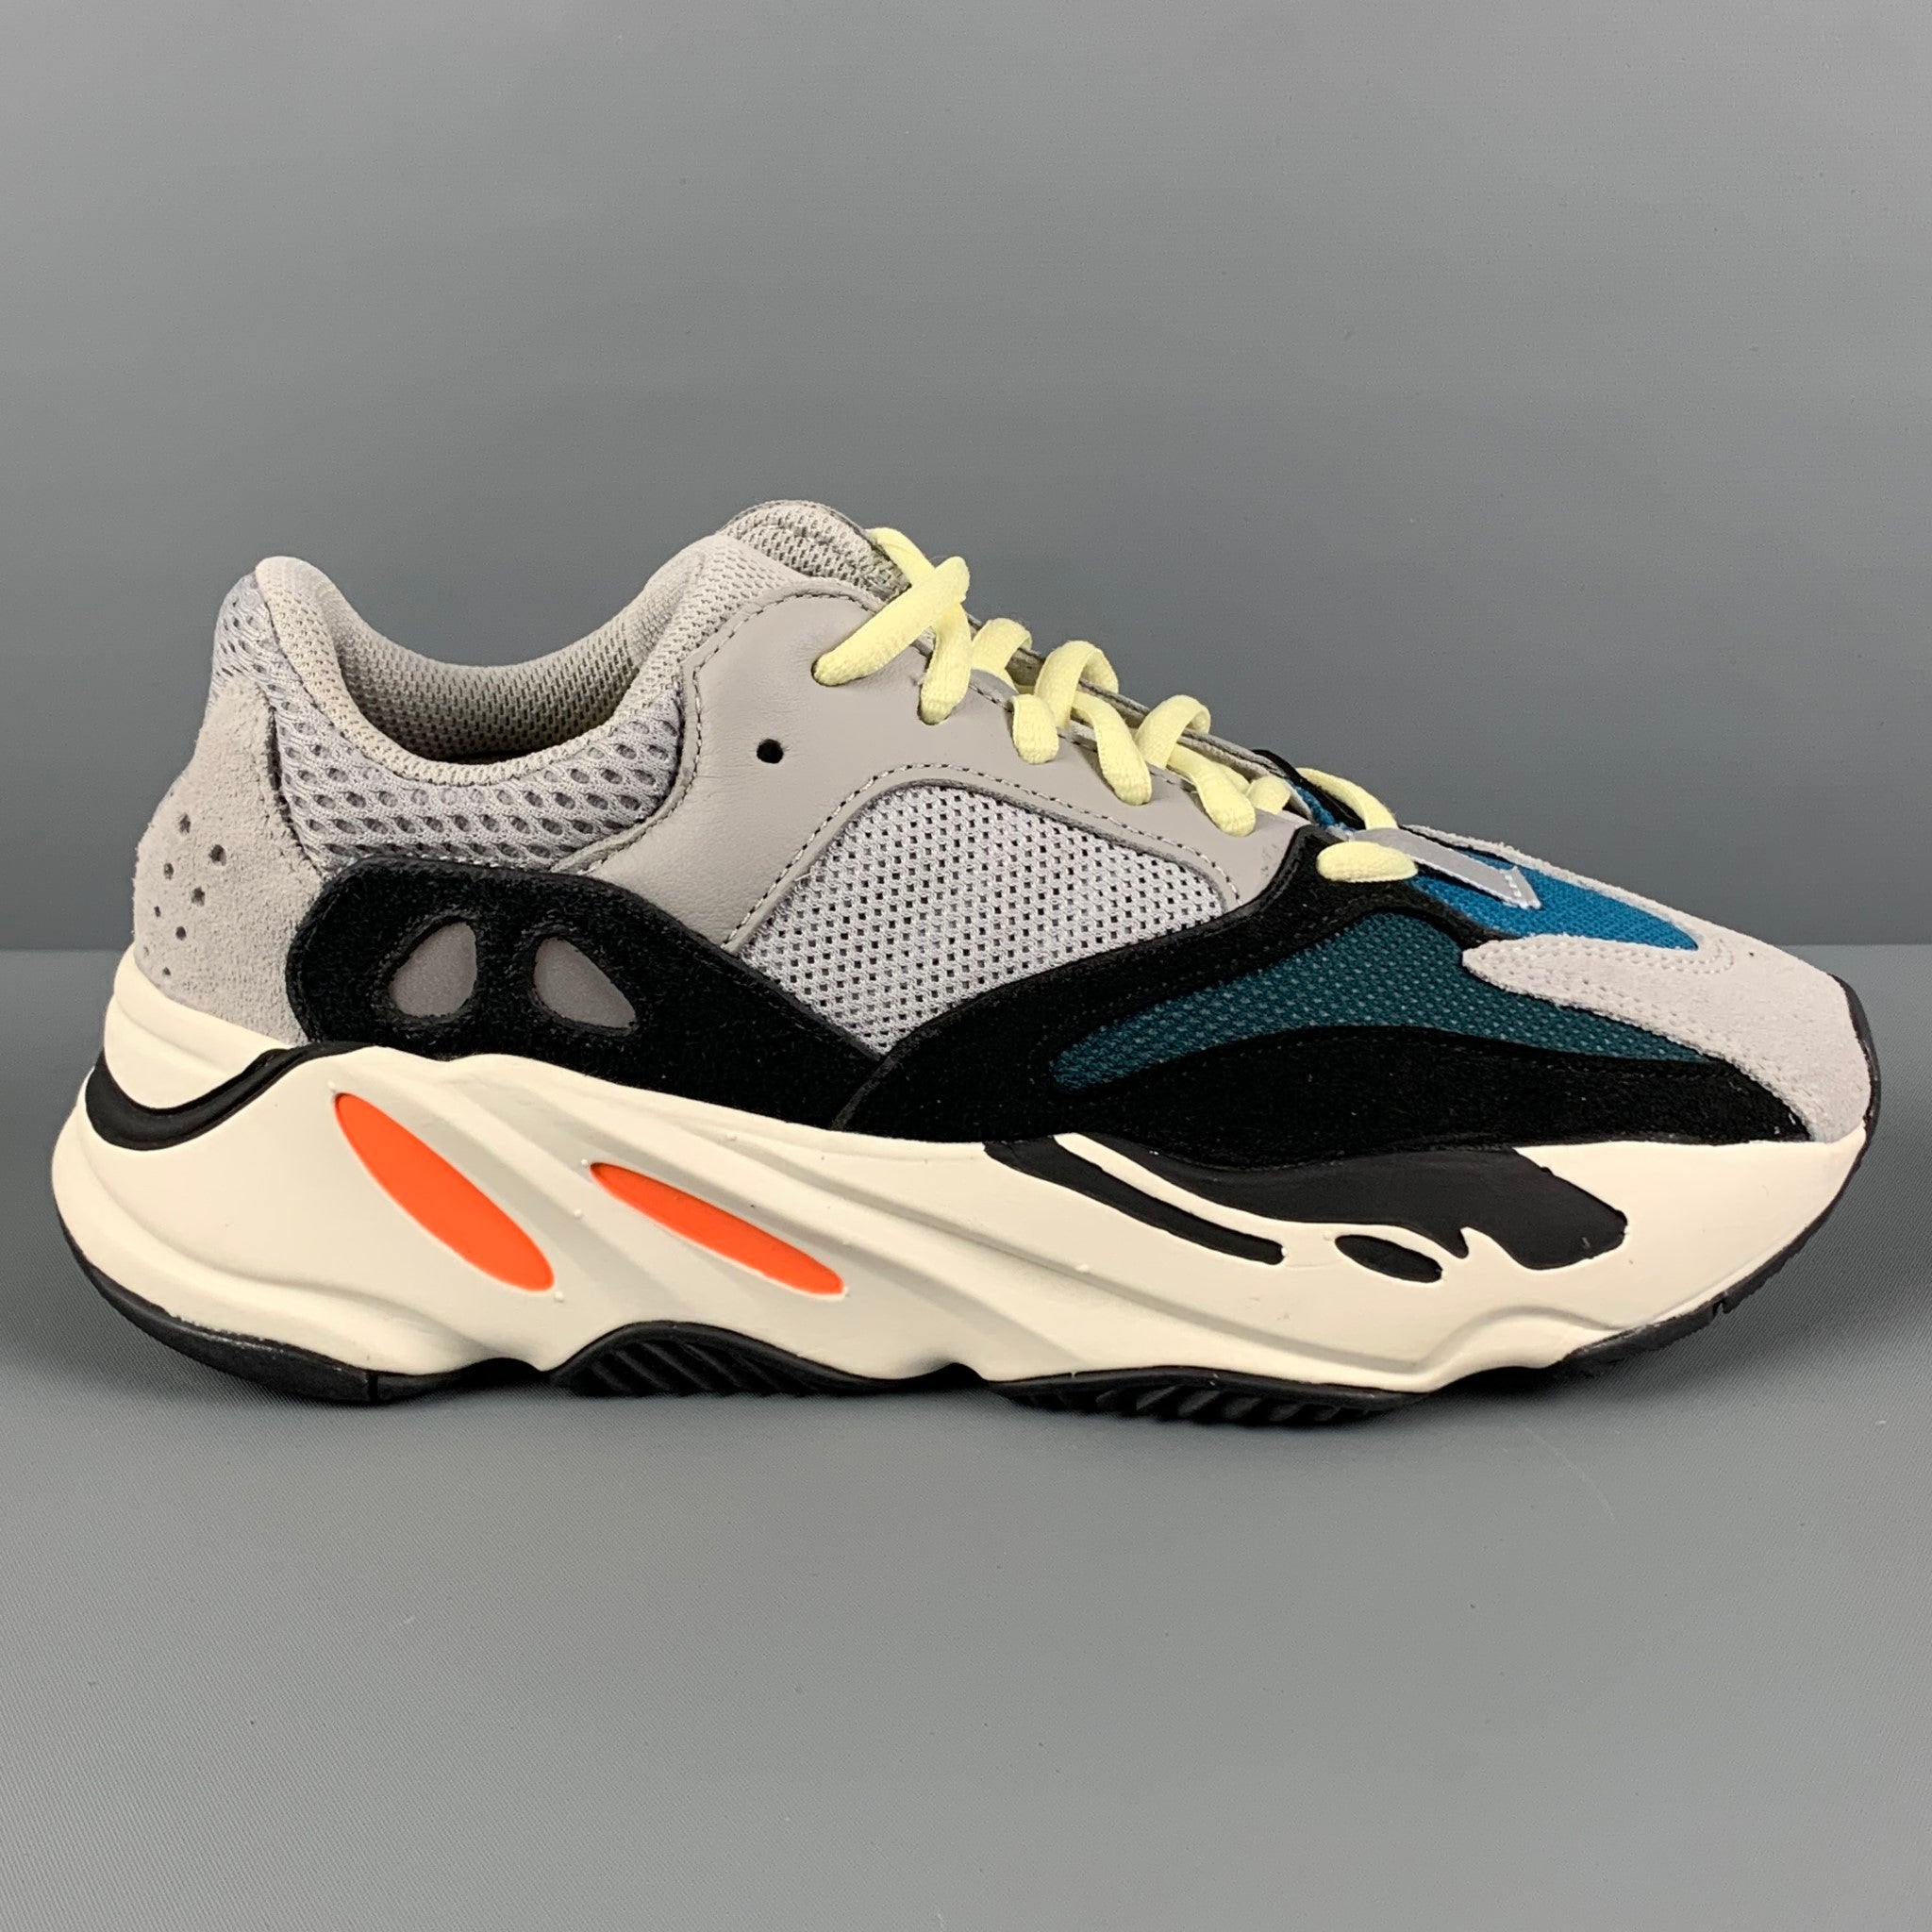 ADIDAS x YEEZY Wave Runner Boost 700 Size 6 Grey Multi-Color Snea – Sui Designer Consignment